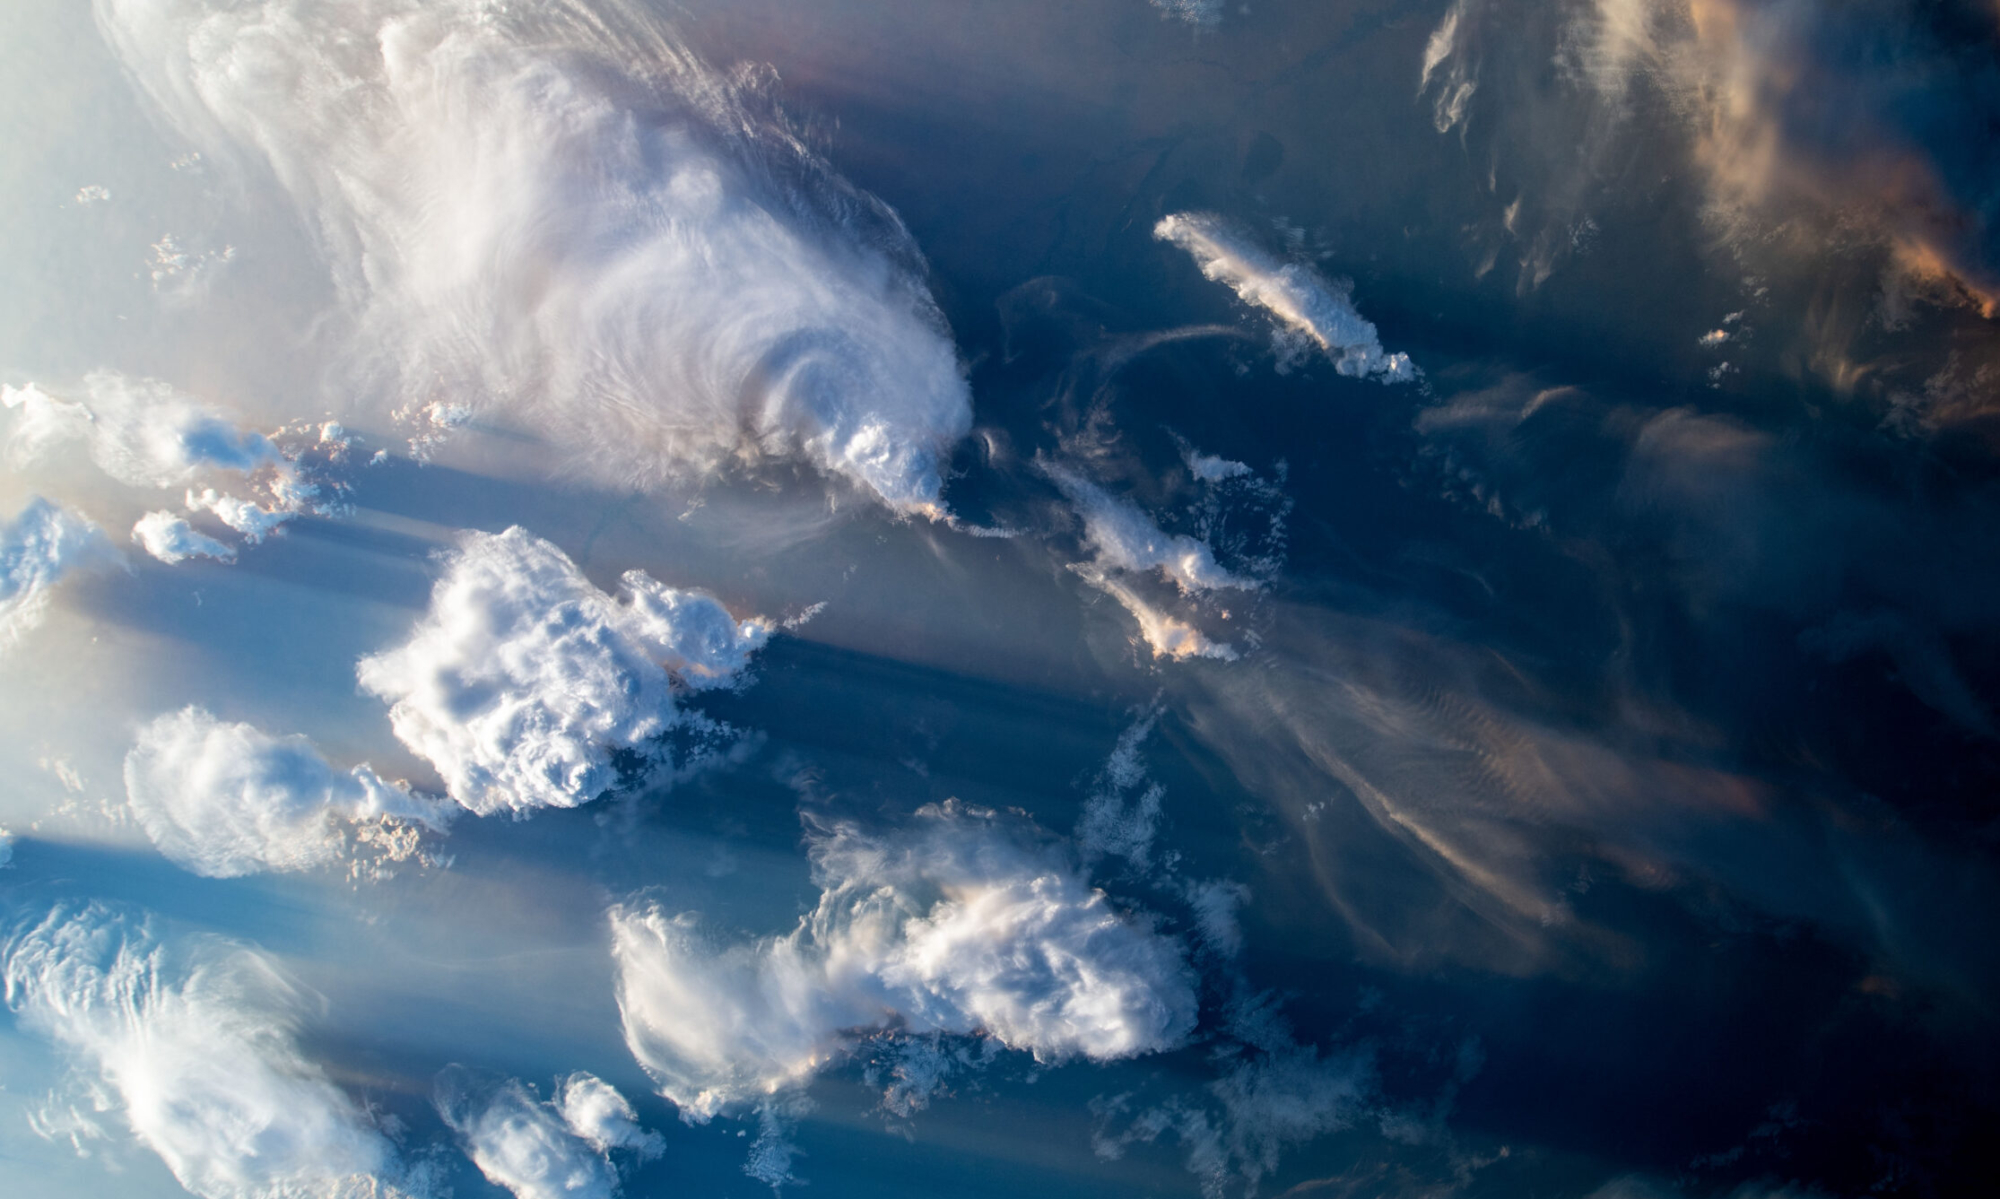 A photograph taken from the International Space Station of clouds forming over North Africa